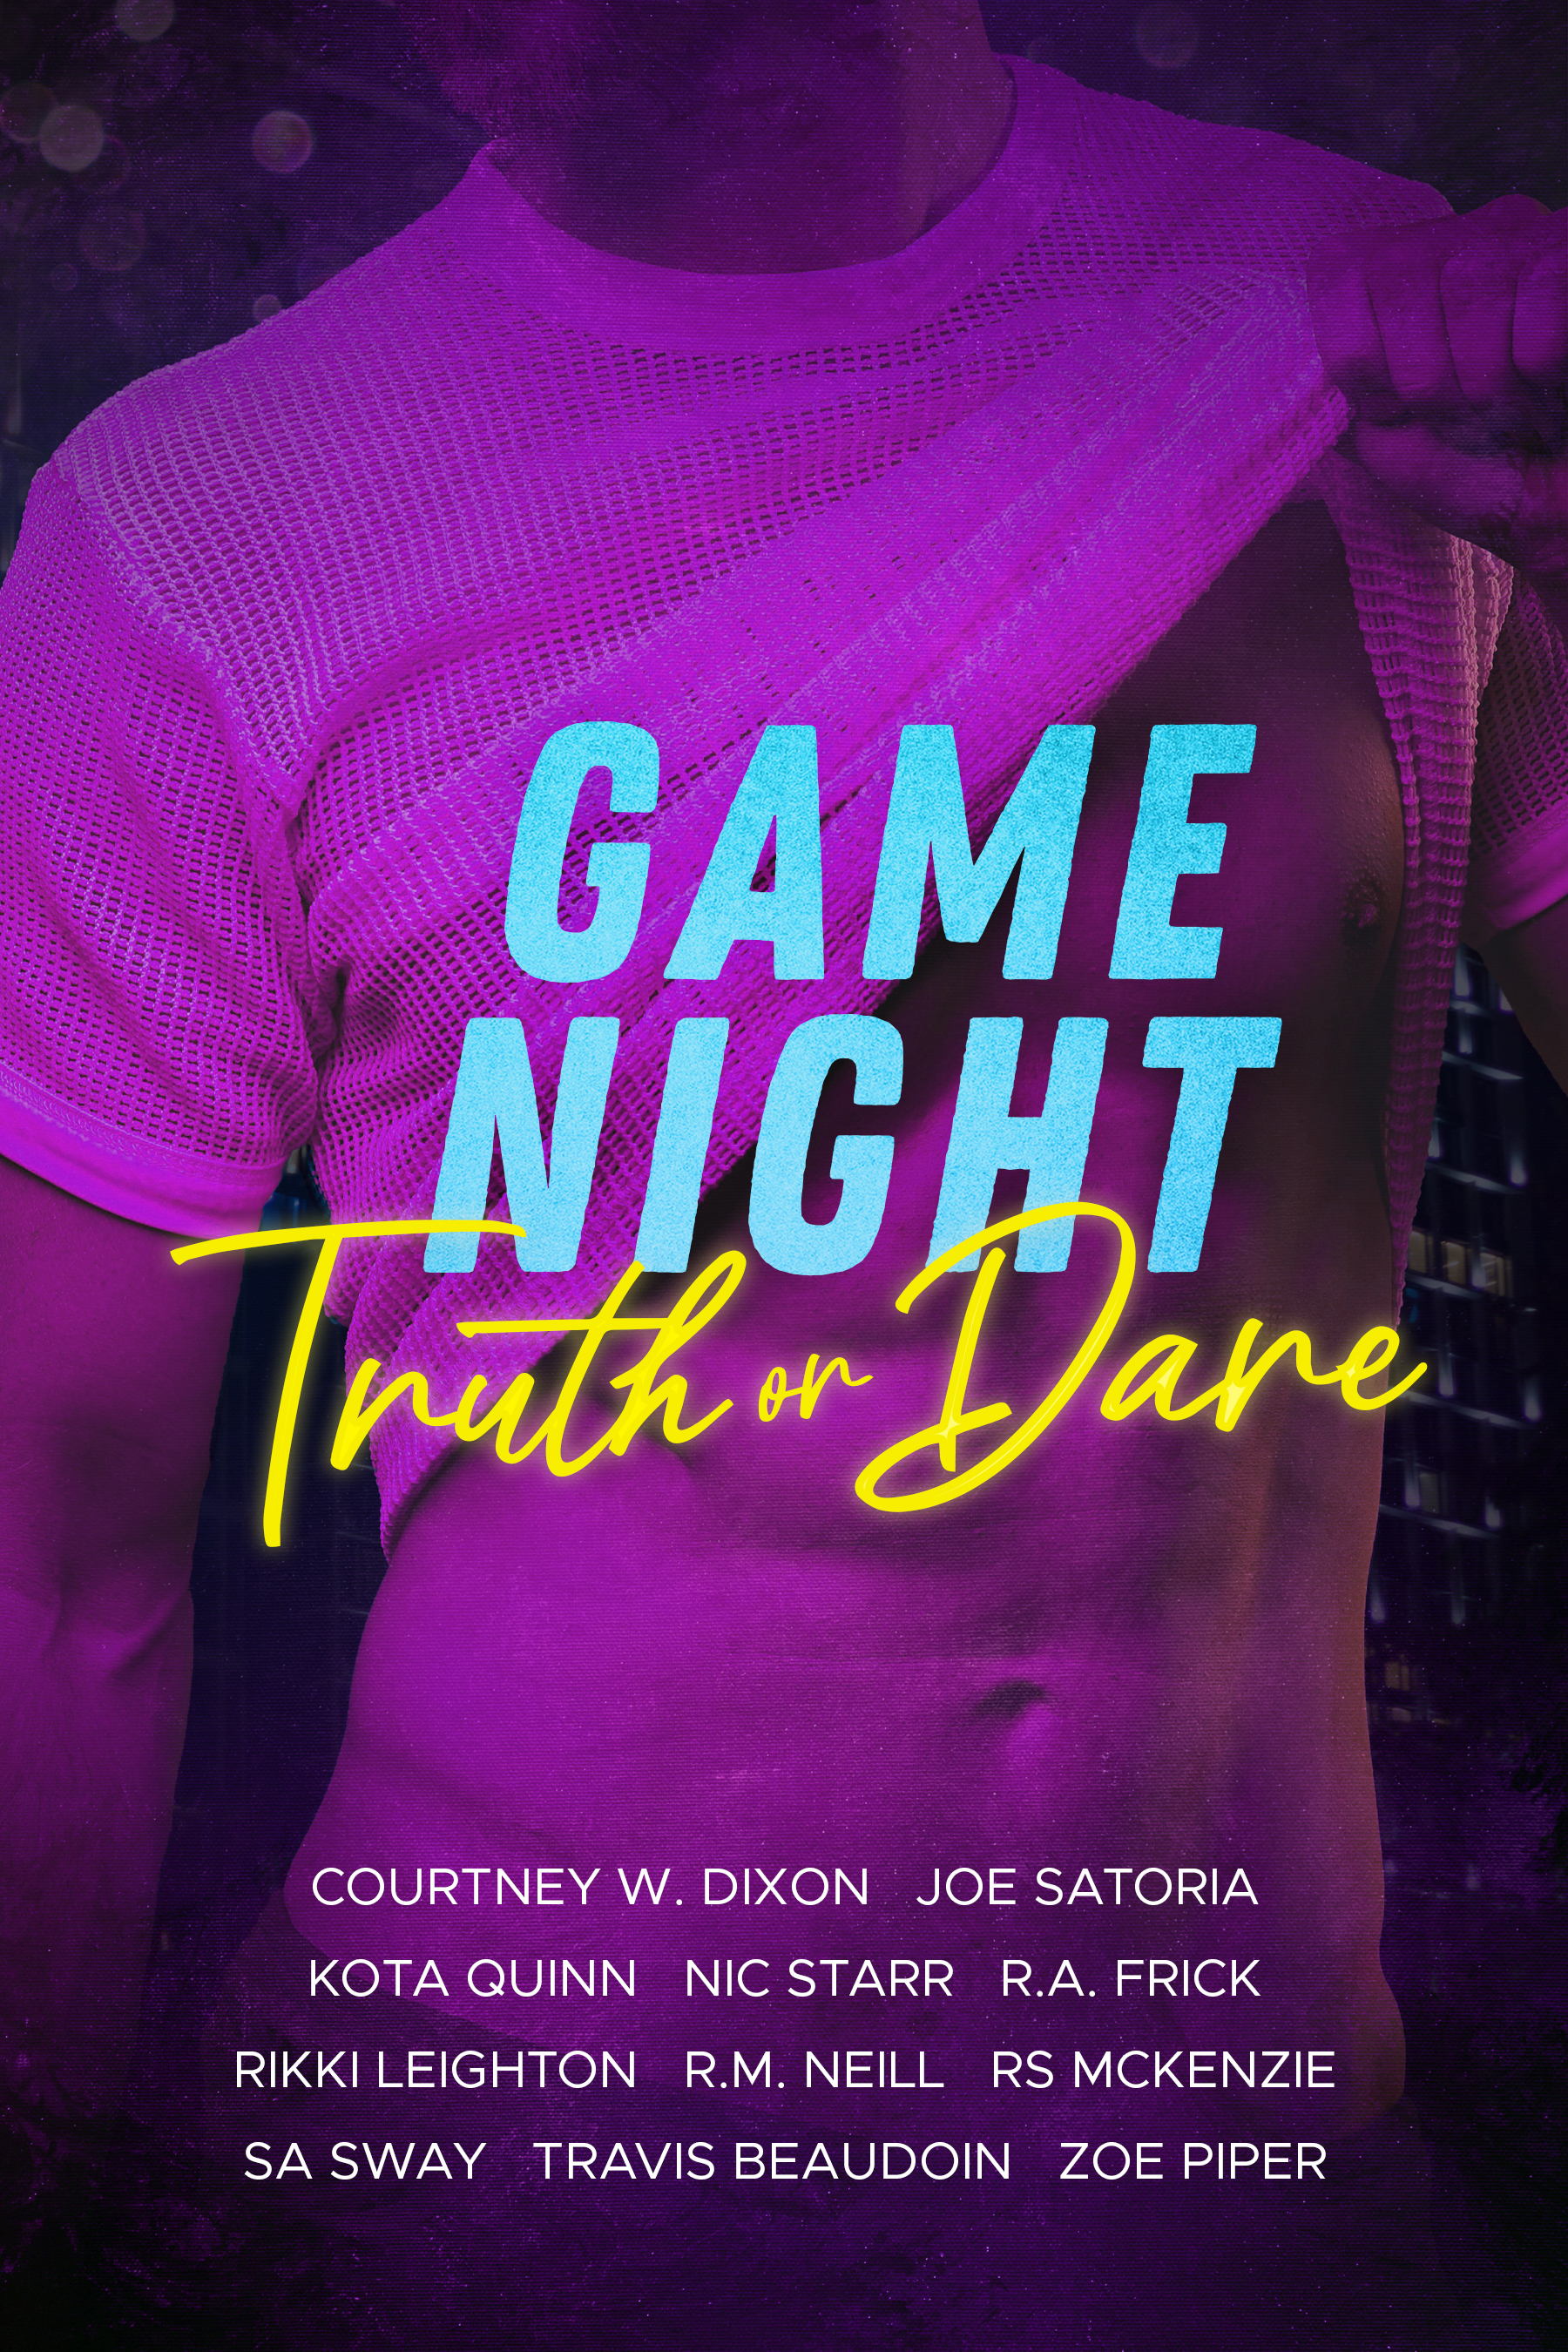 Game Night Cover